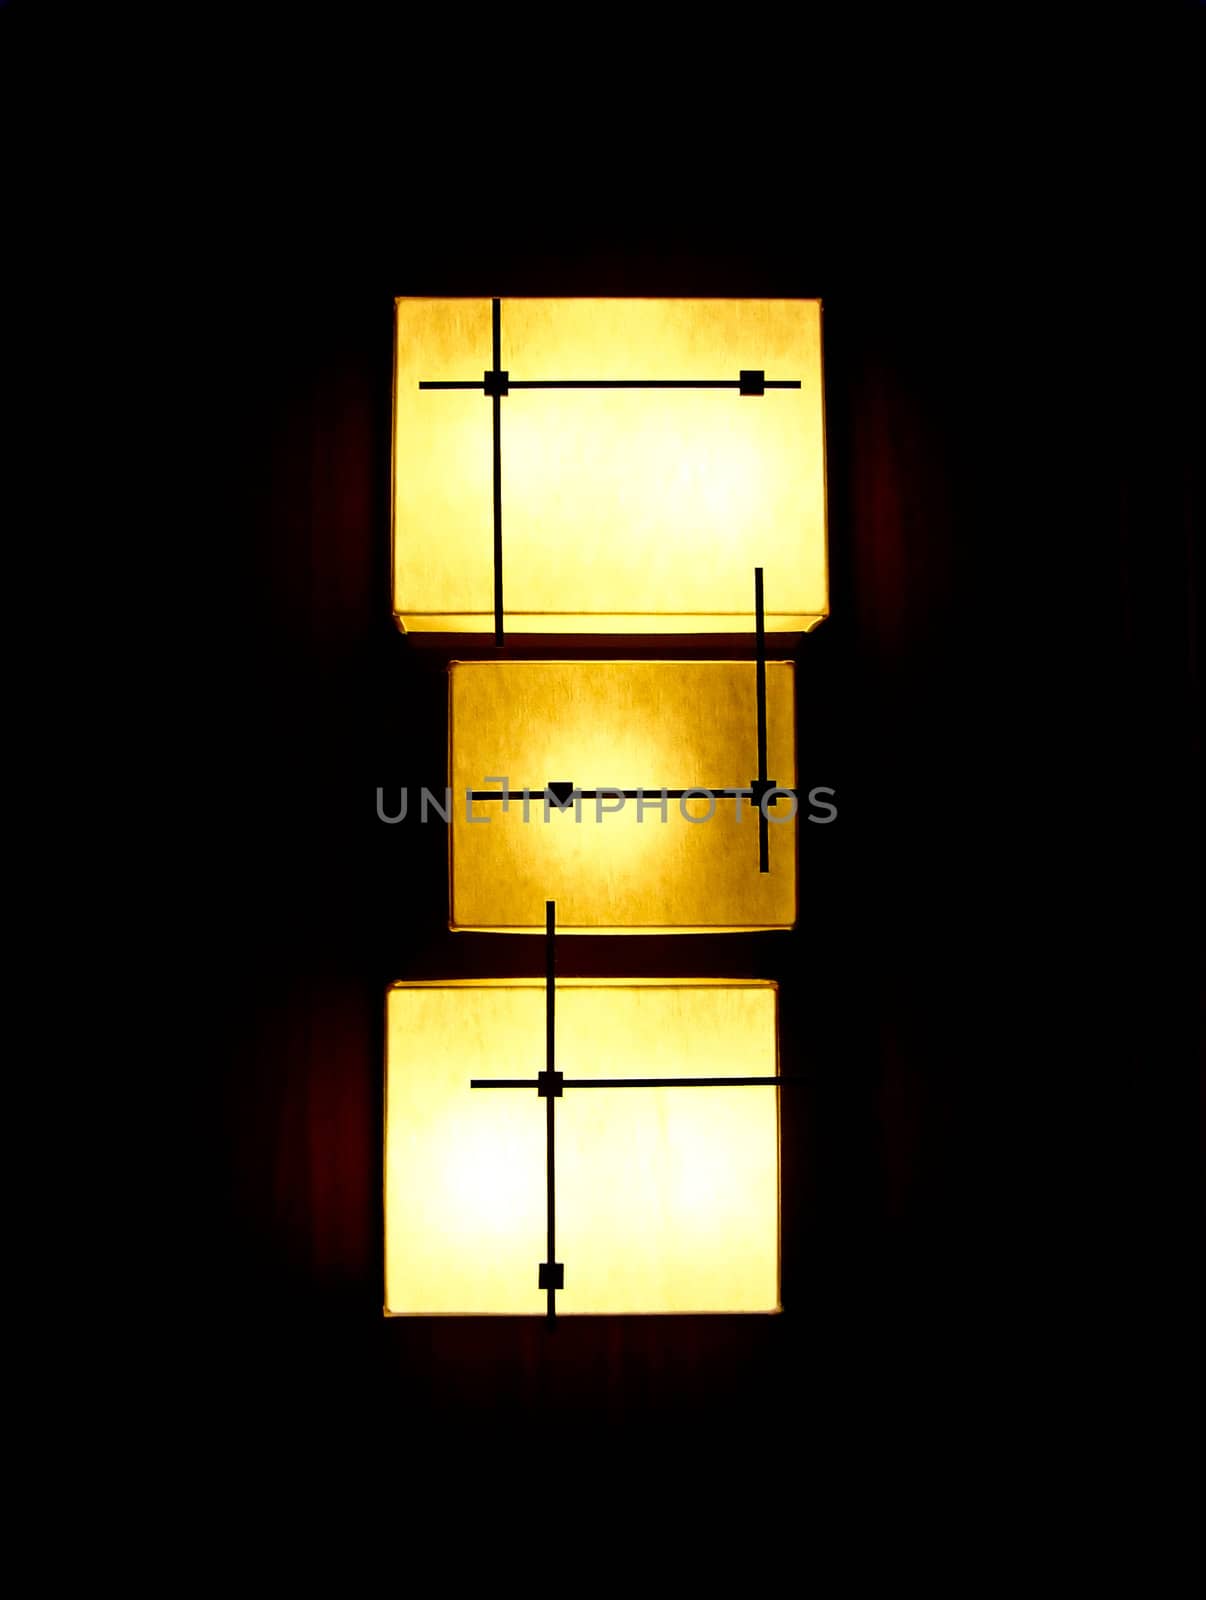 A modern or contemporary light hanging on the wall